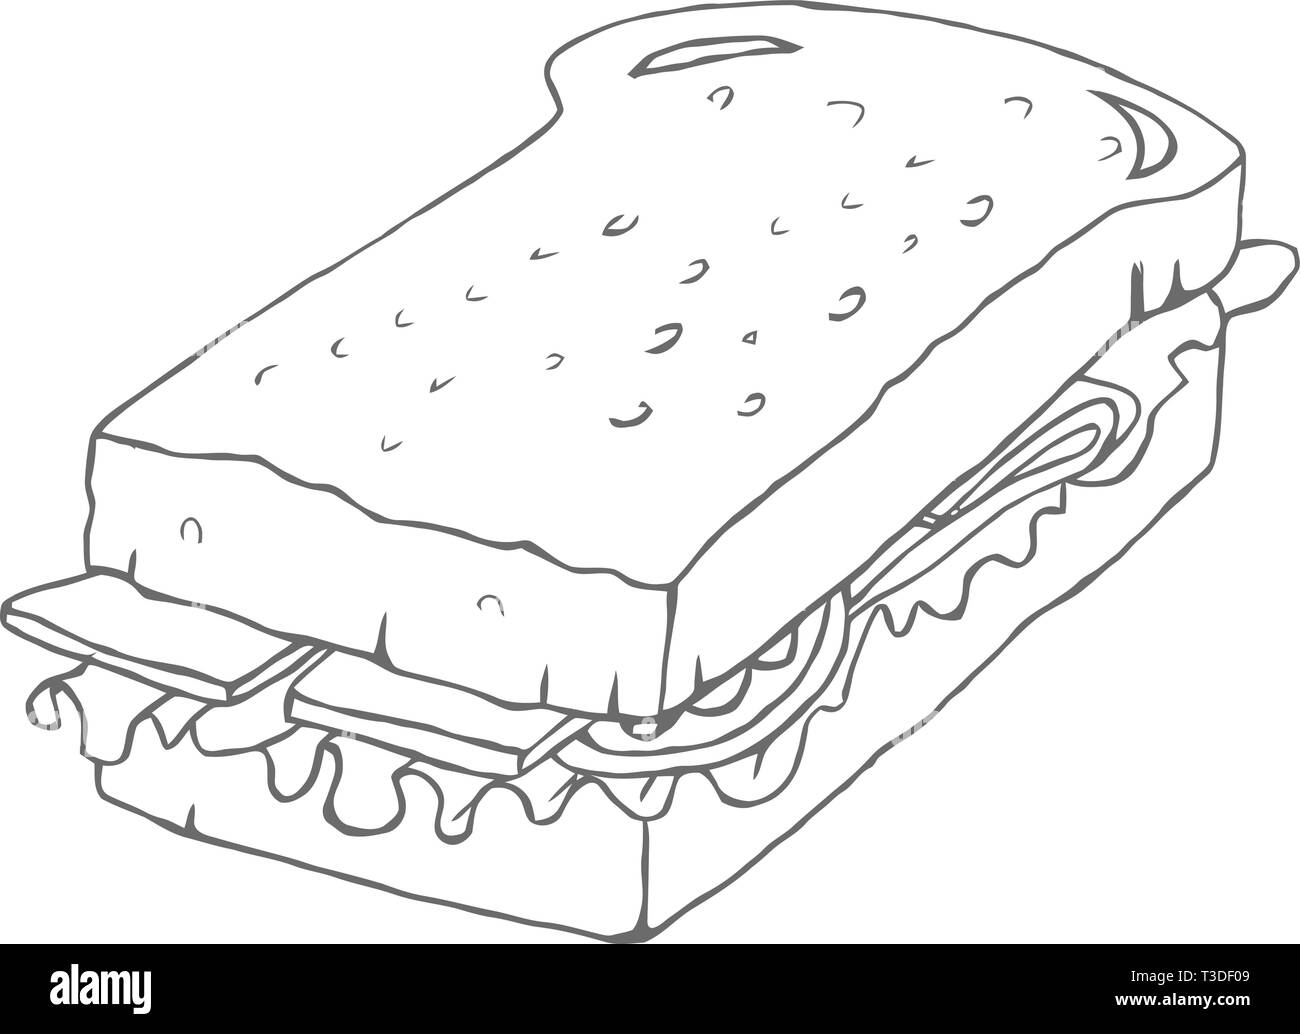 Sandwich outline drawing. Great for restaurant menu or banner Stock Vector